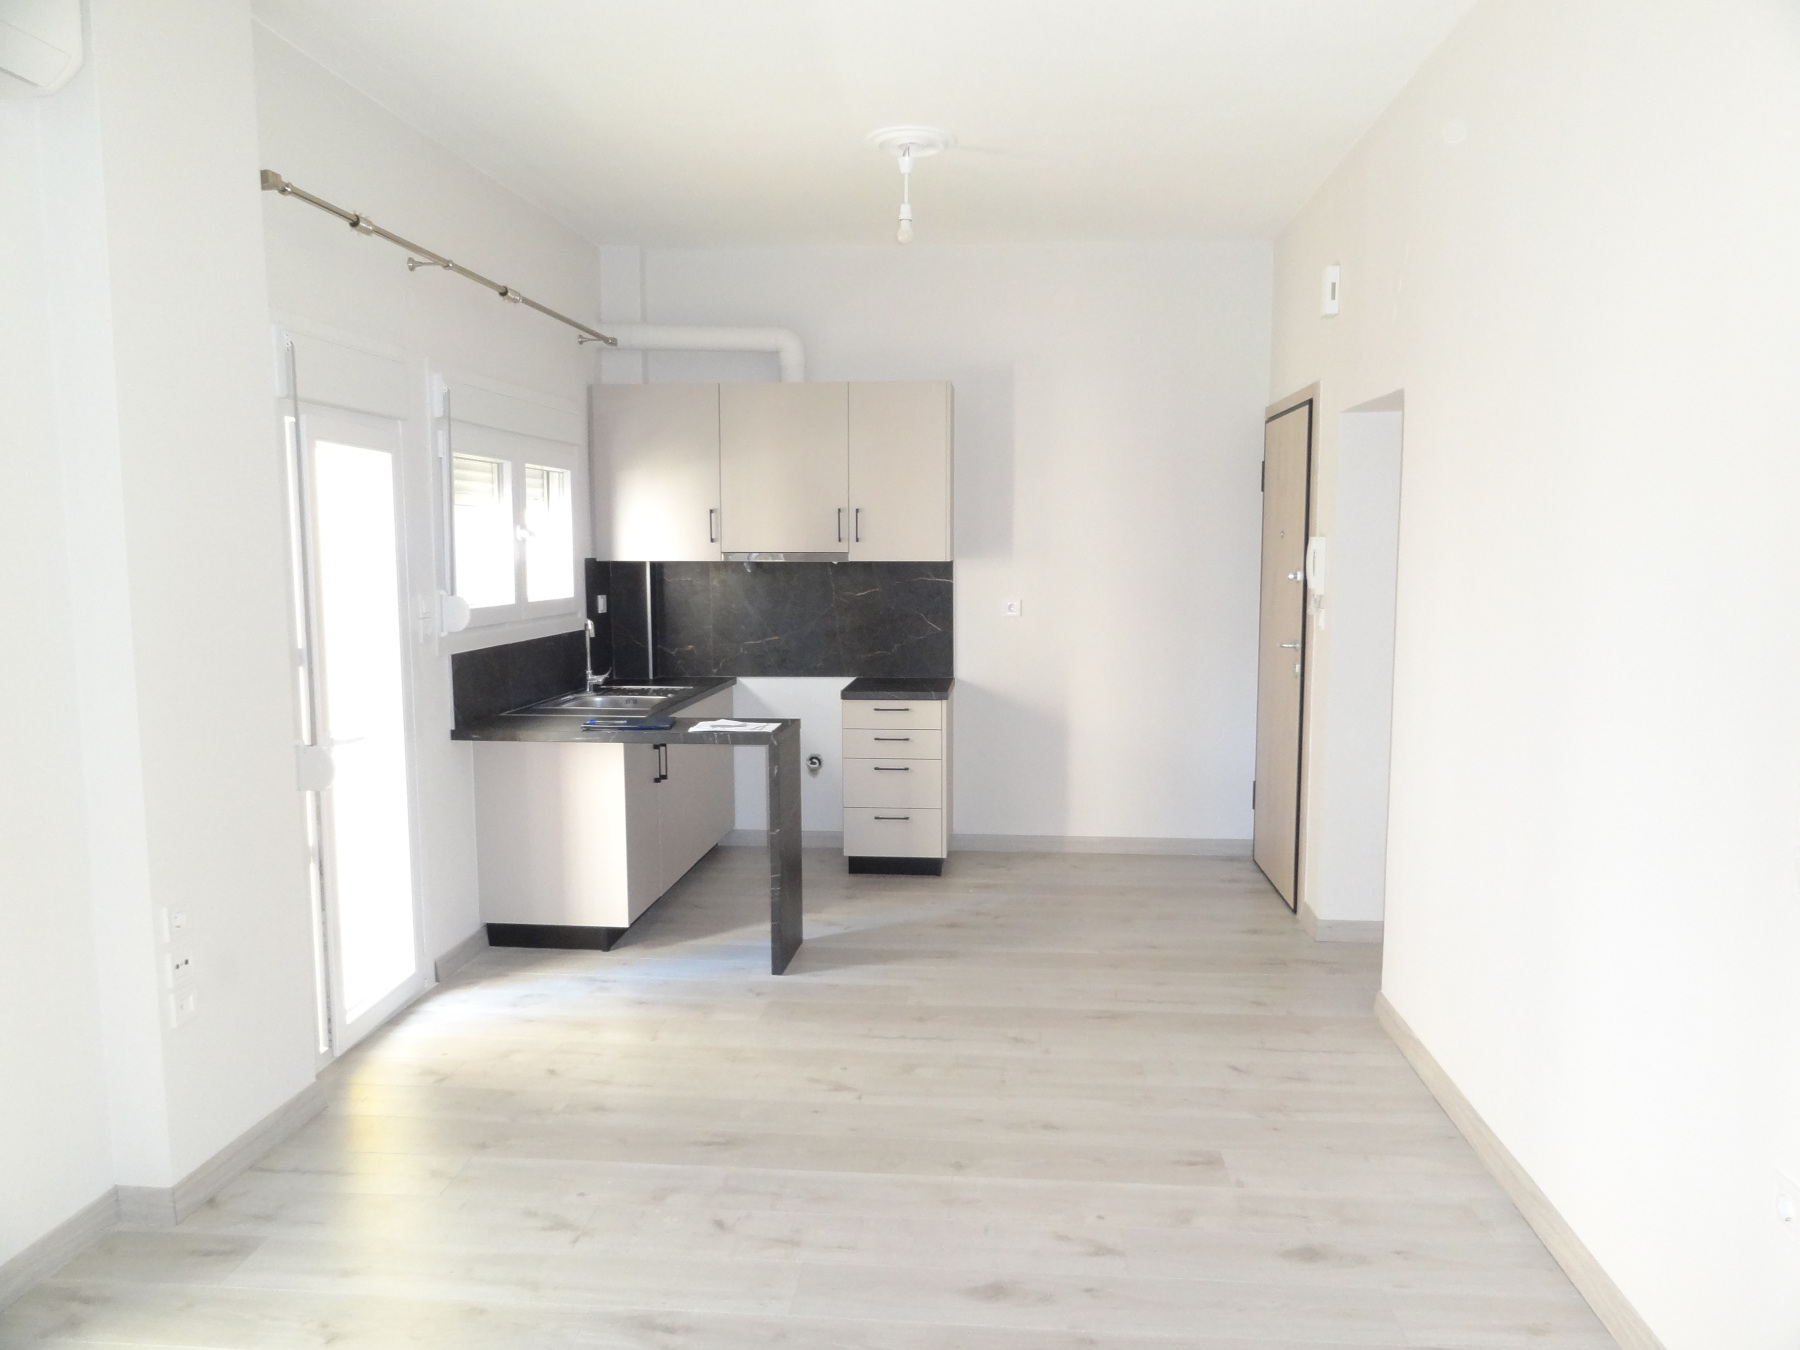 Studio for rent 33 sq.m. 3rd floor renovated in 2023 in the center of Ioannina near Pargis Square